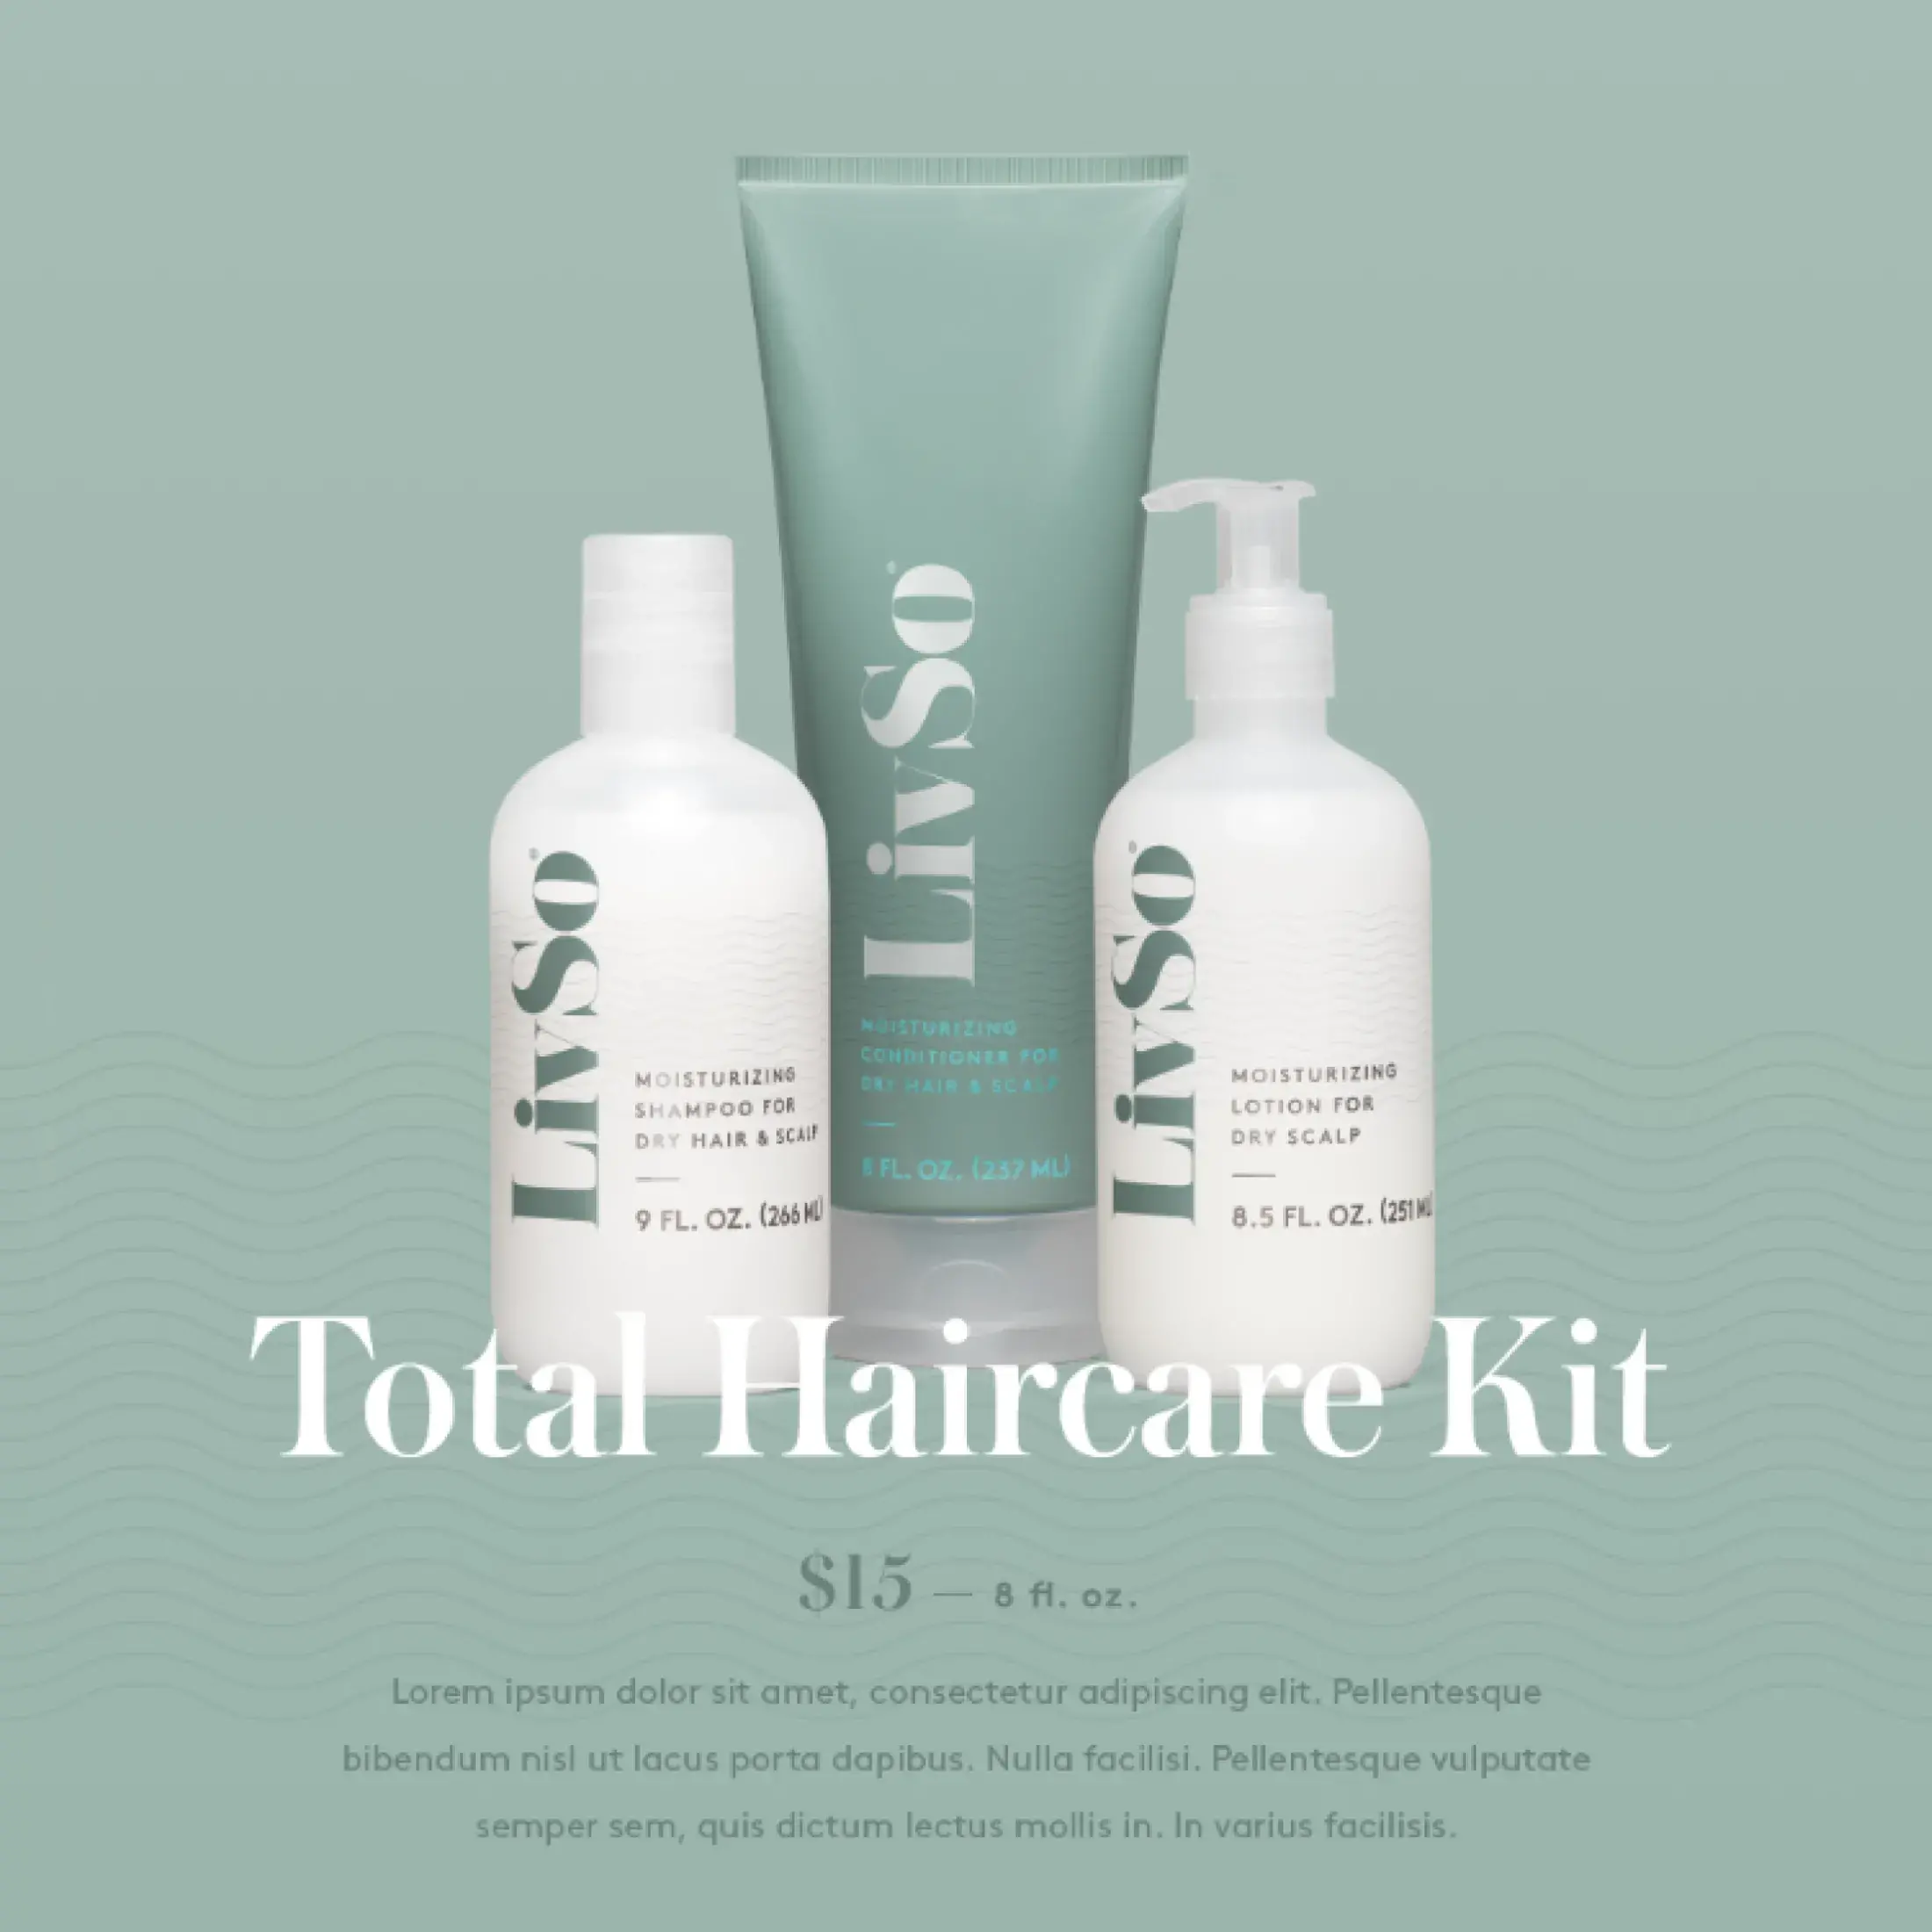 Product listing for the LivSo Total Haircare Kit